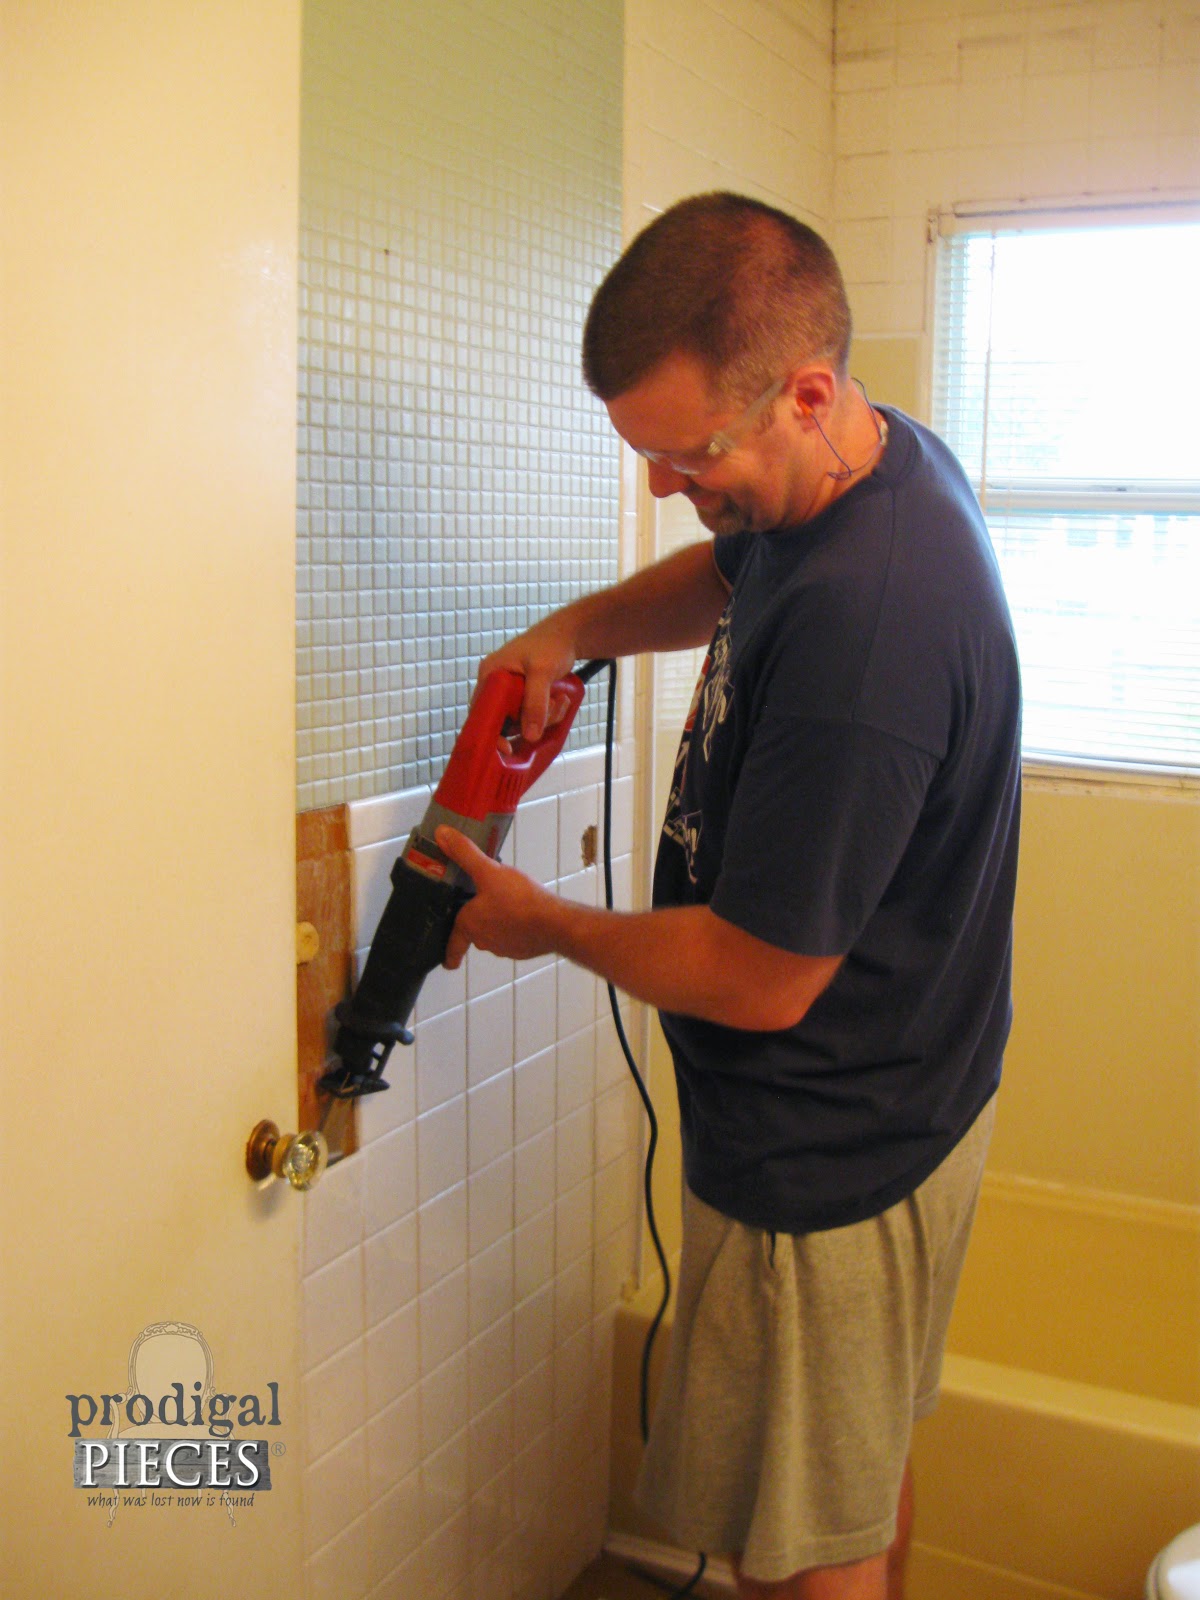 Removing Old Tile in Bathroom Makeover | prodigalpieces.com